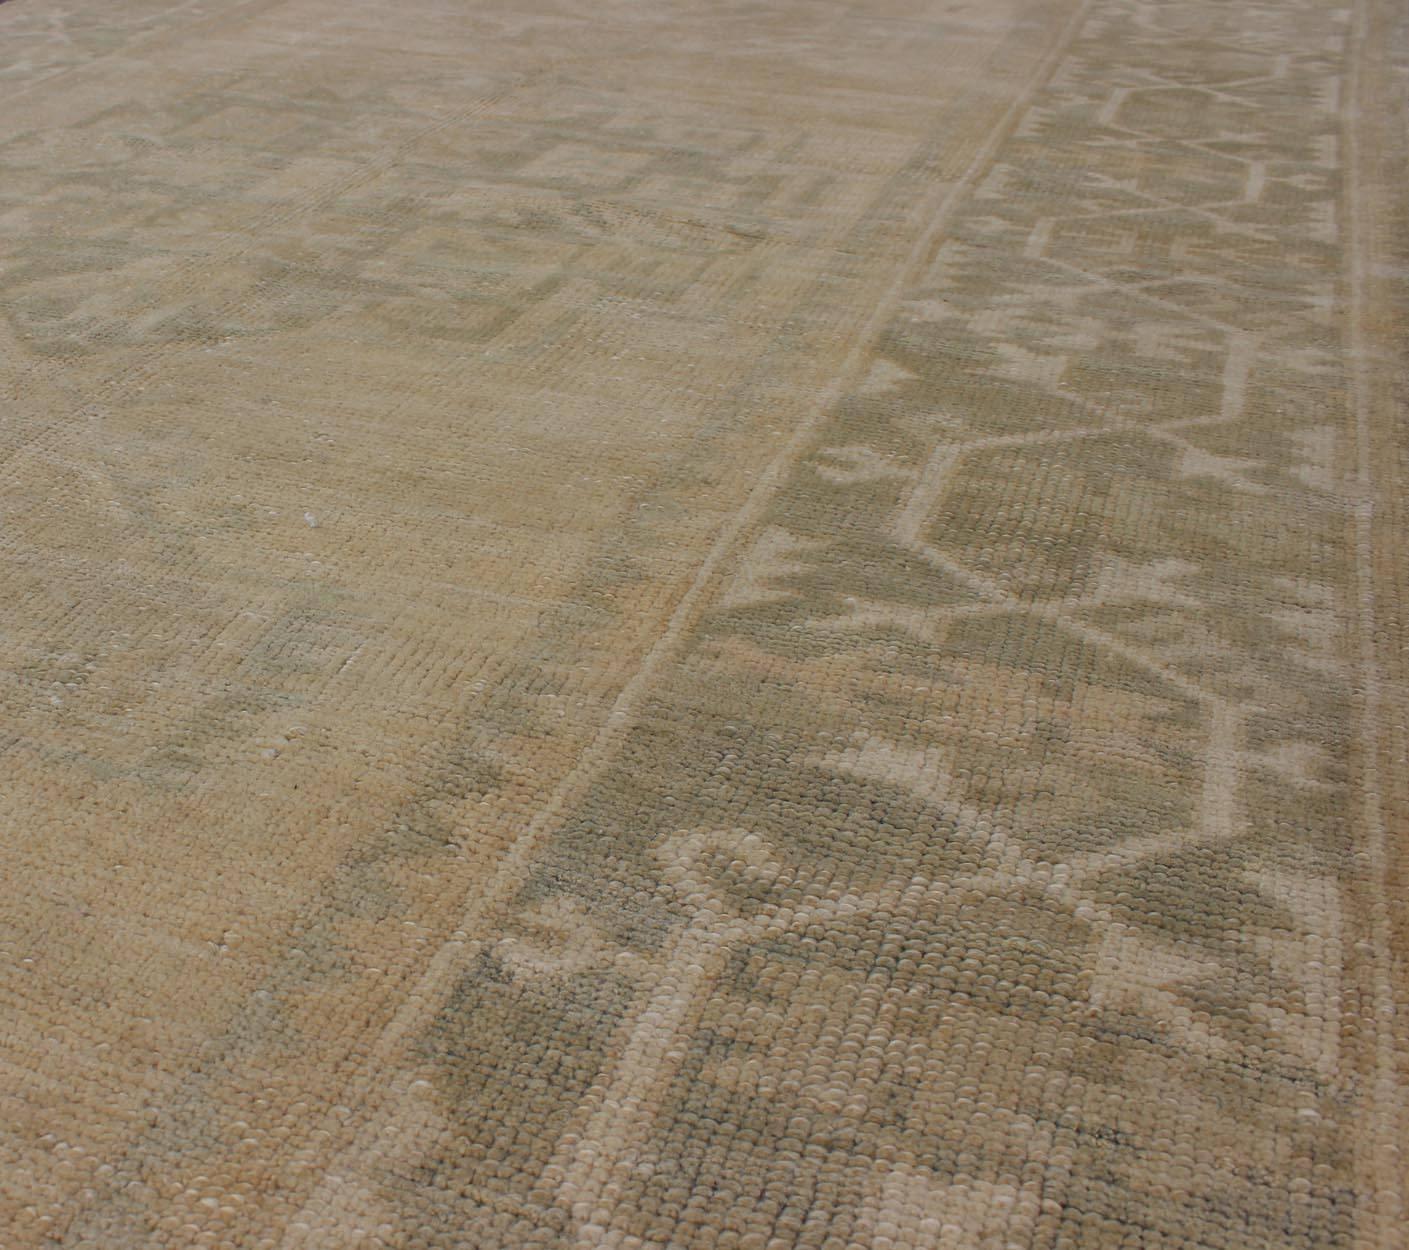 Mid-20th Century Medallion Vintage Turkish Oushak Rug in Taupe, Green and Sand Colors For Sale